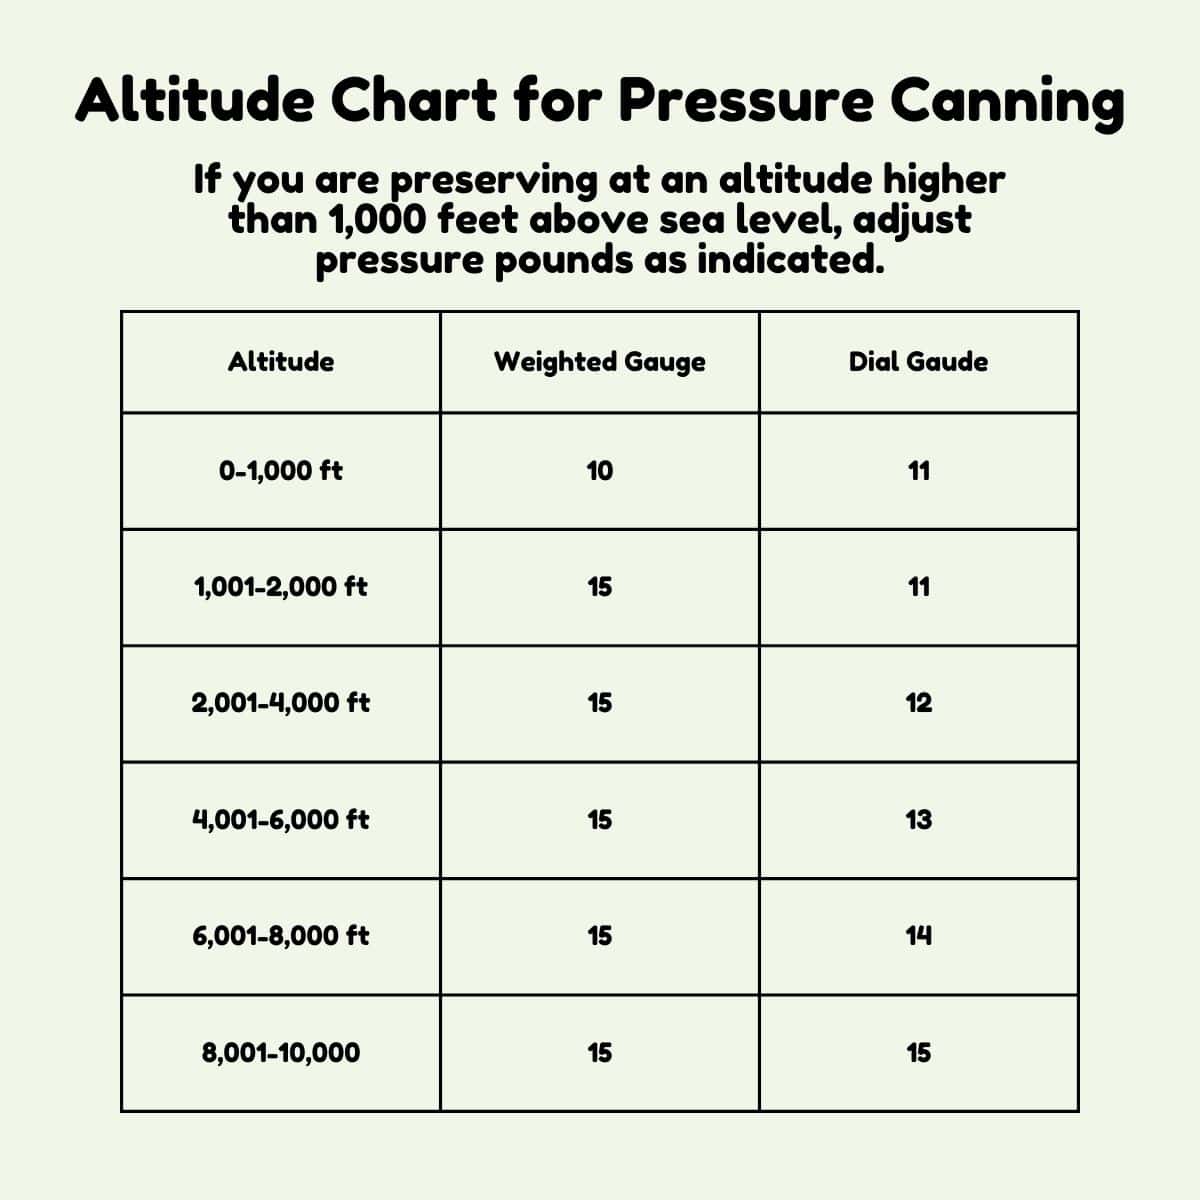 Altitude Chart for Pressure Canning